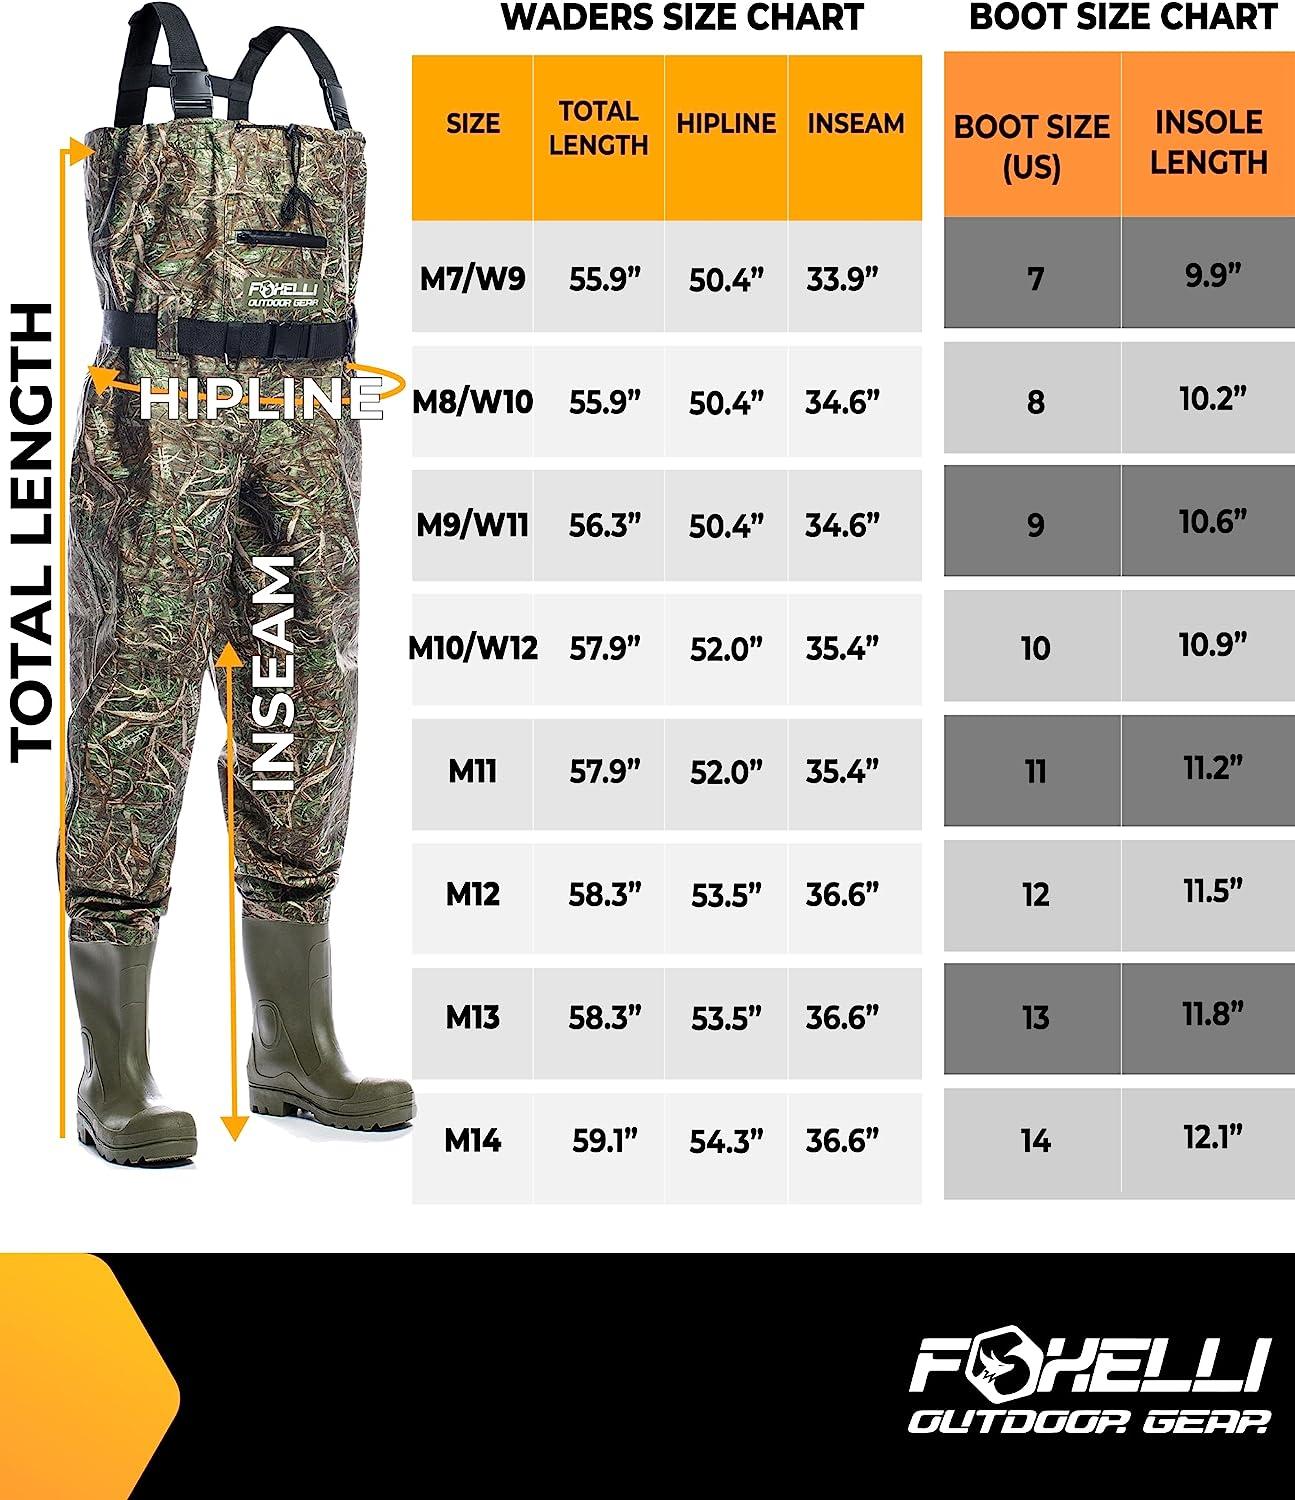 Hunting and Fishing Waders for Men&Women